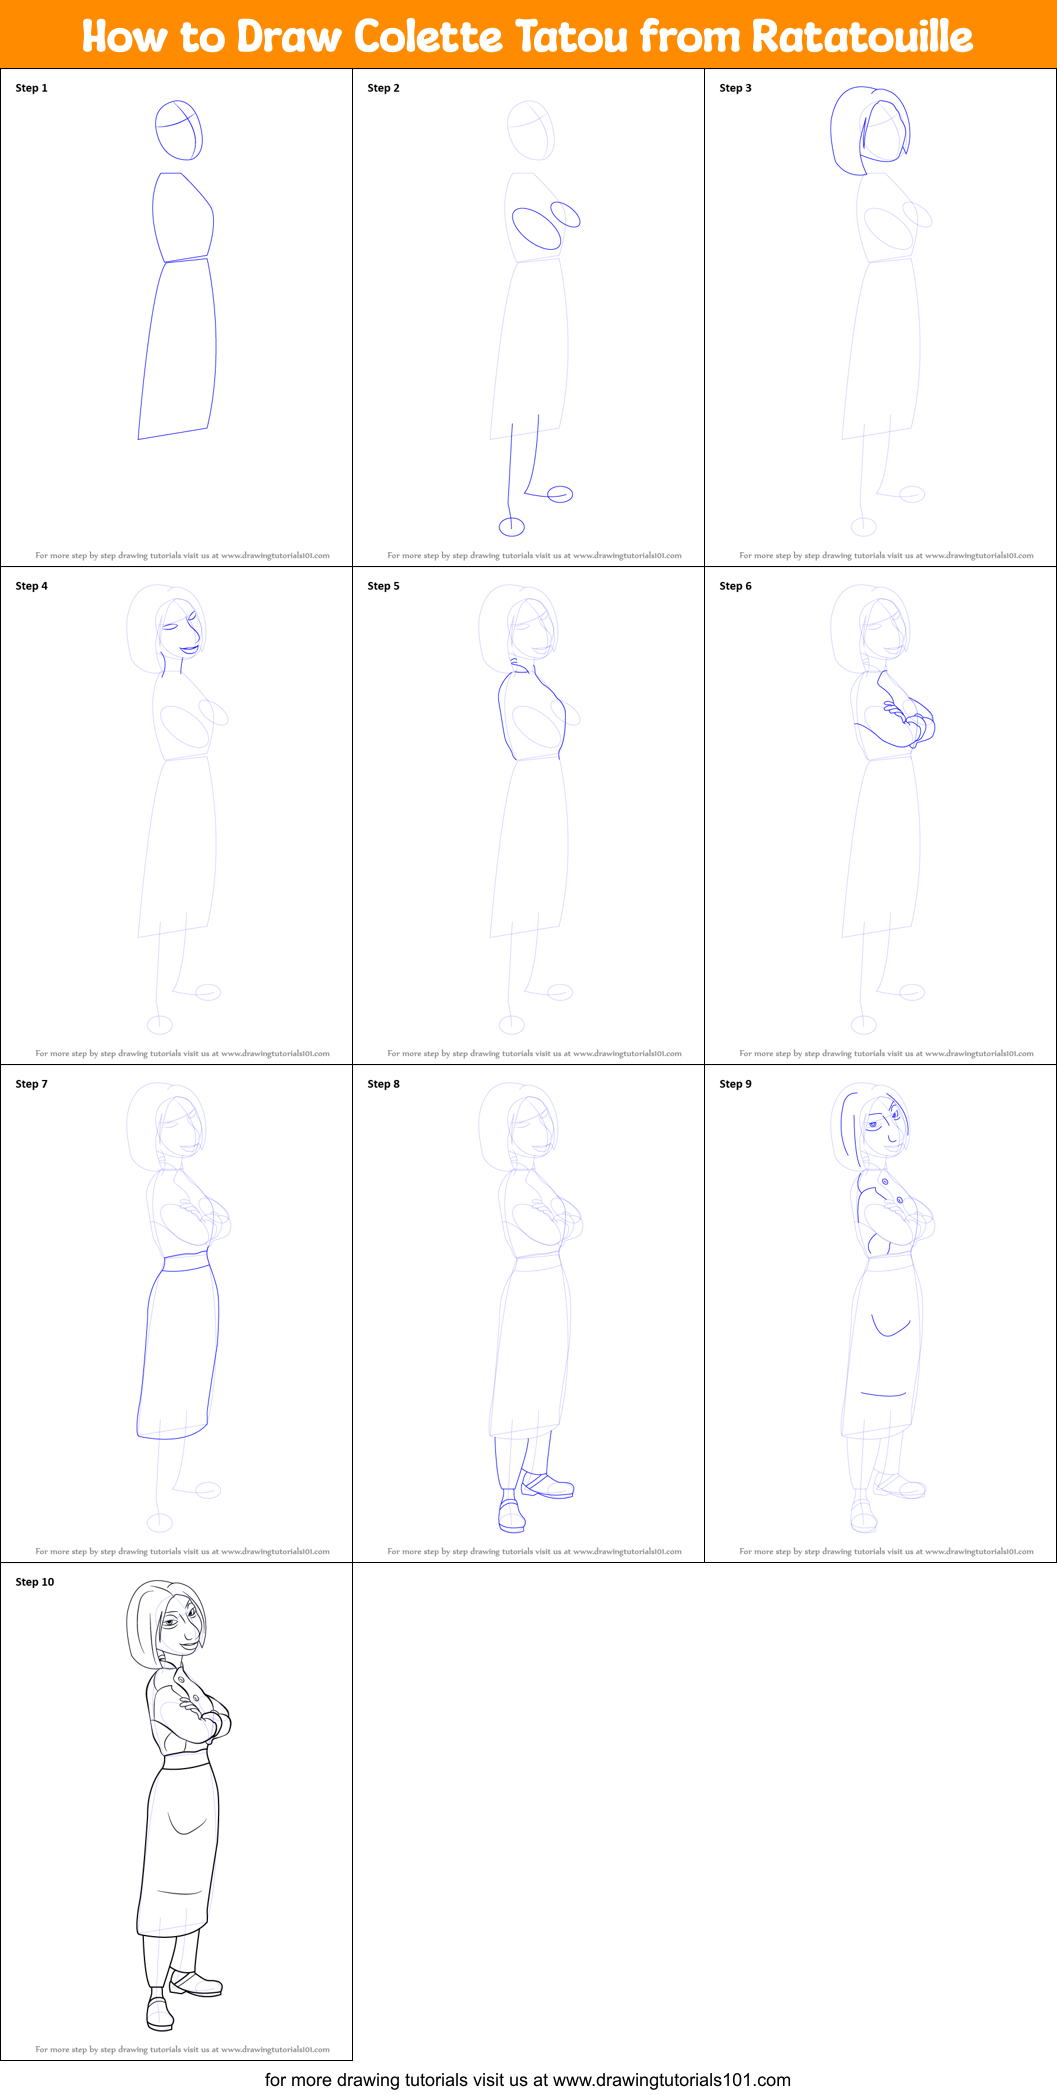 Download How to Draw Colette Tatou from Ratatouille printable step by step drawing sheet ...